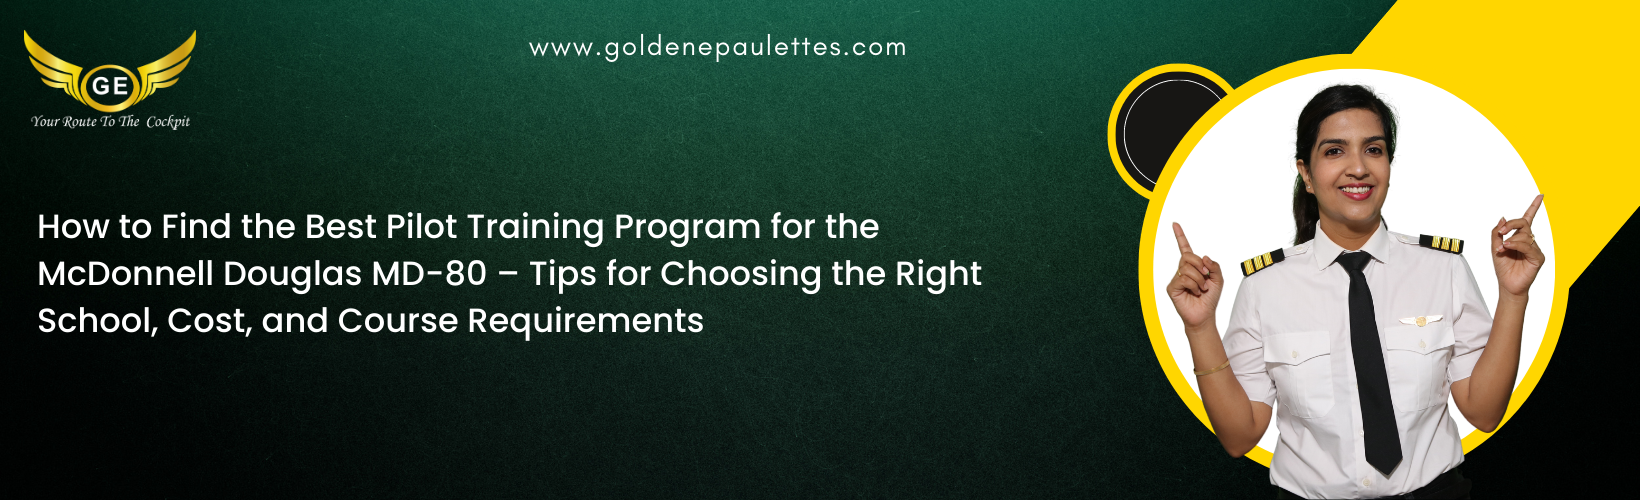 How to Choose the Right Pilot Training Program for the McDonnell Douglas MD